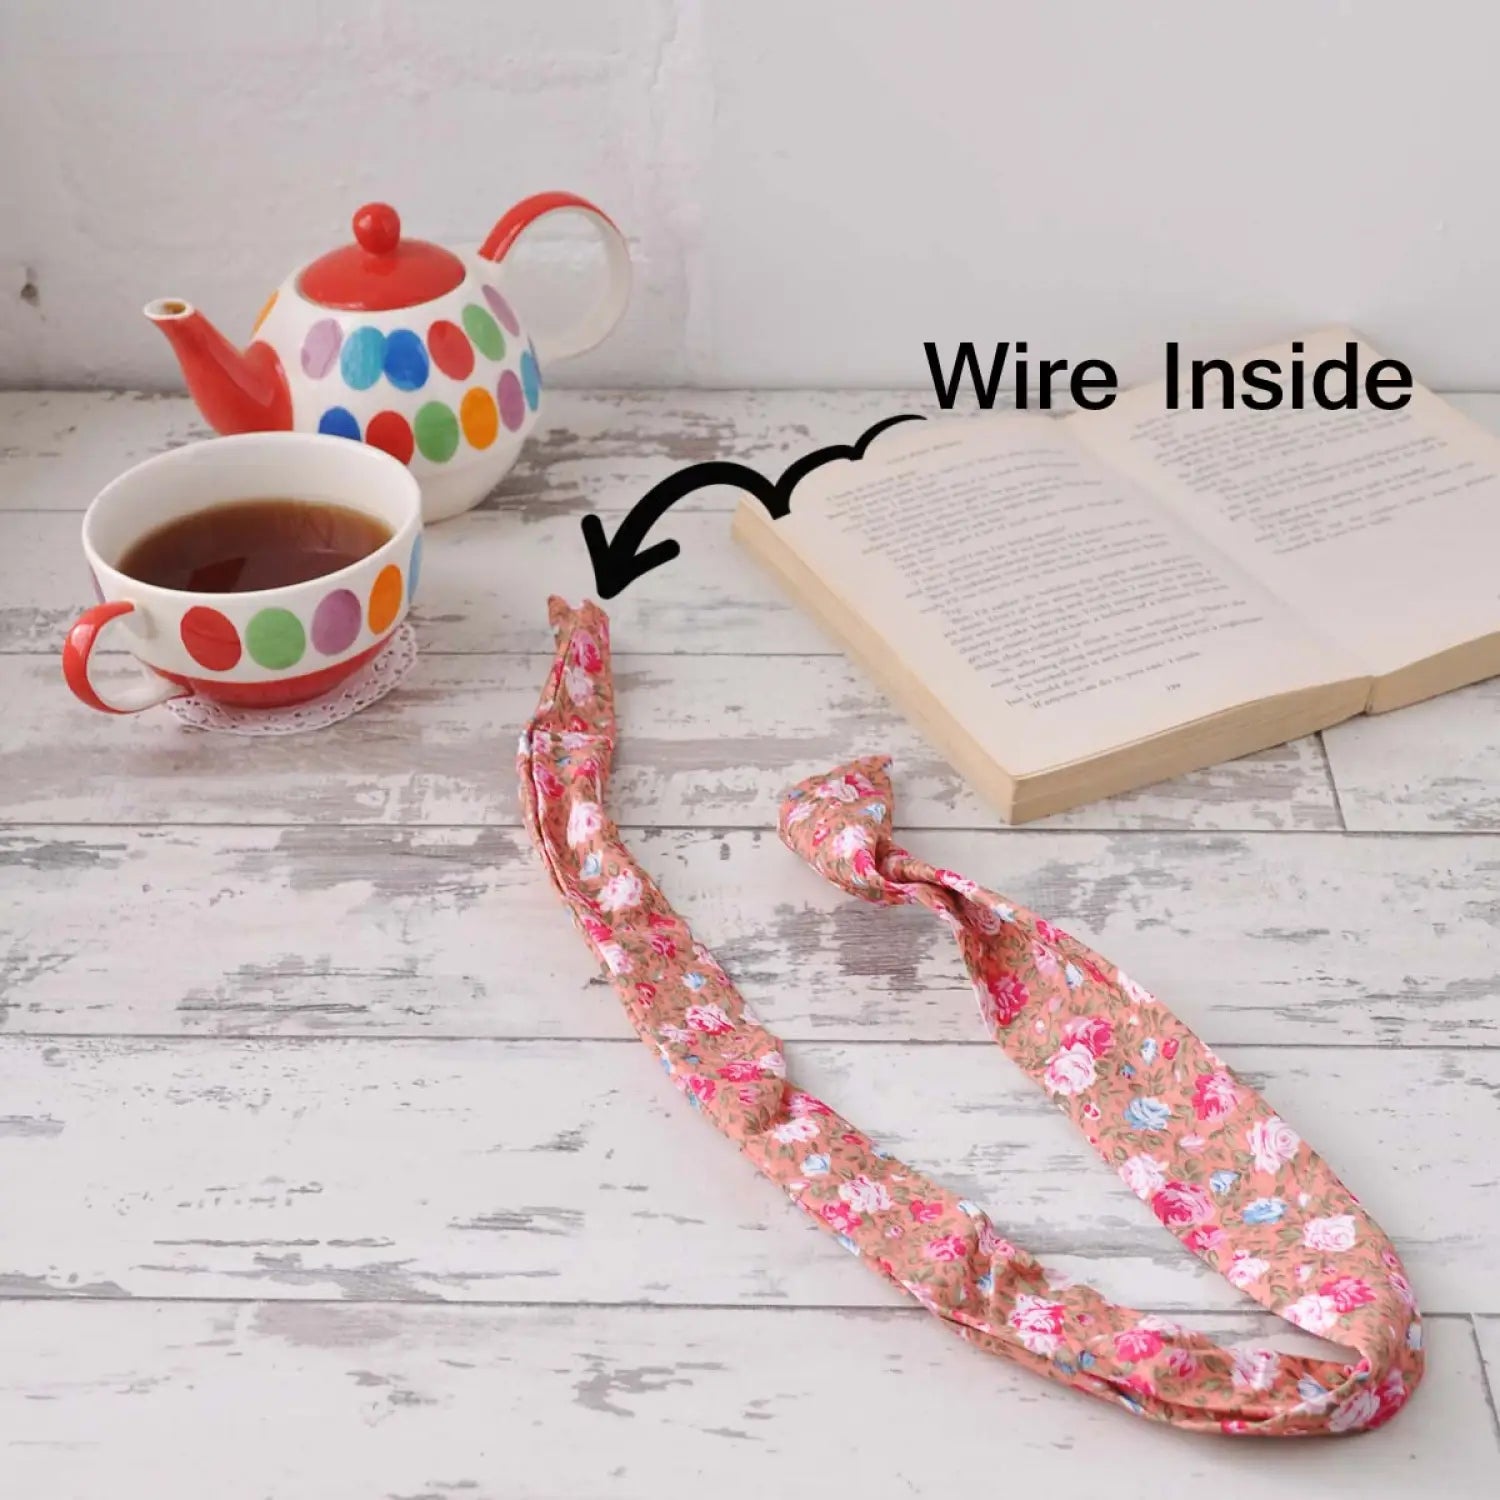 Bunny Ears Retro Rose Print Wire Headband with book, cup, and teapot on table